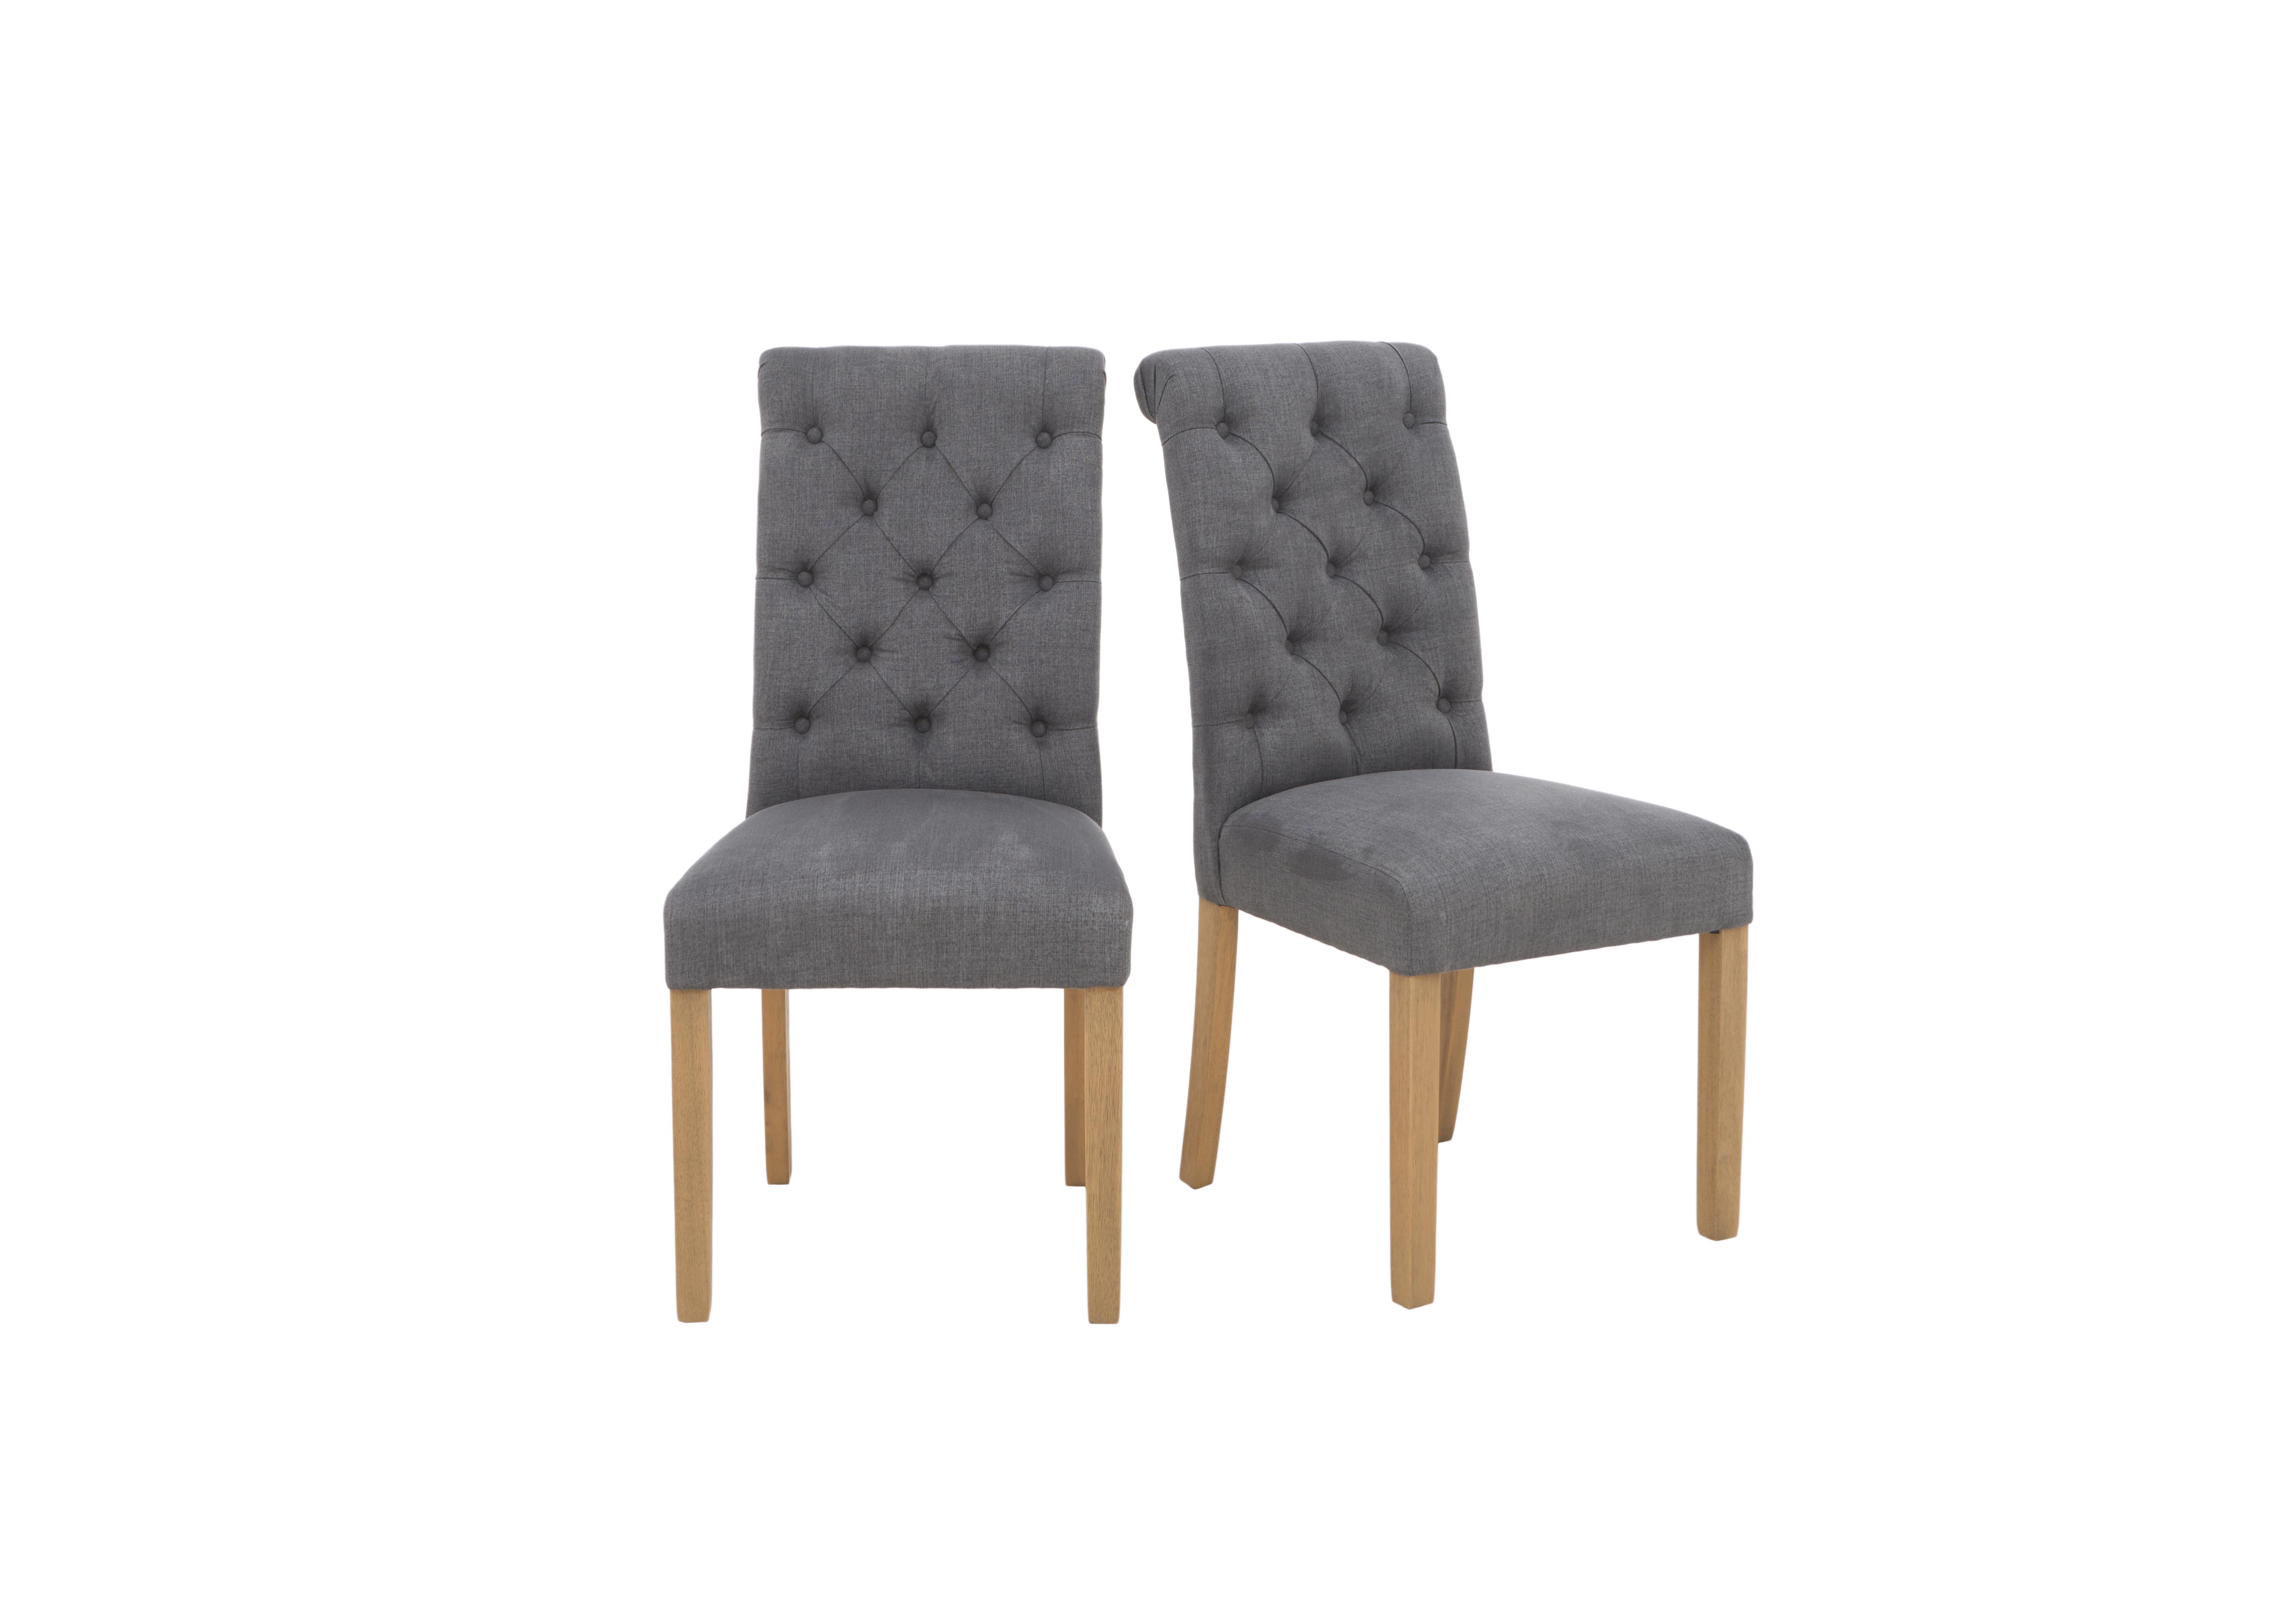 Hamilton Pair of Button Back Dining Chairs in Charcoal on Furniture Village